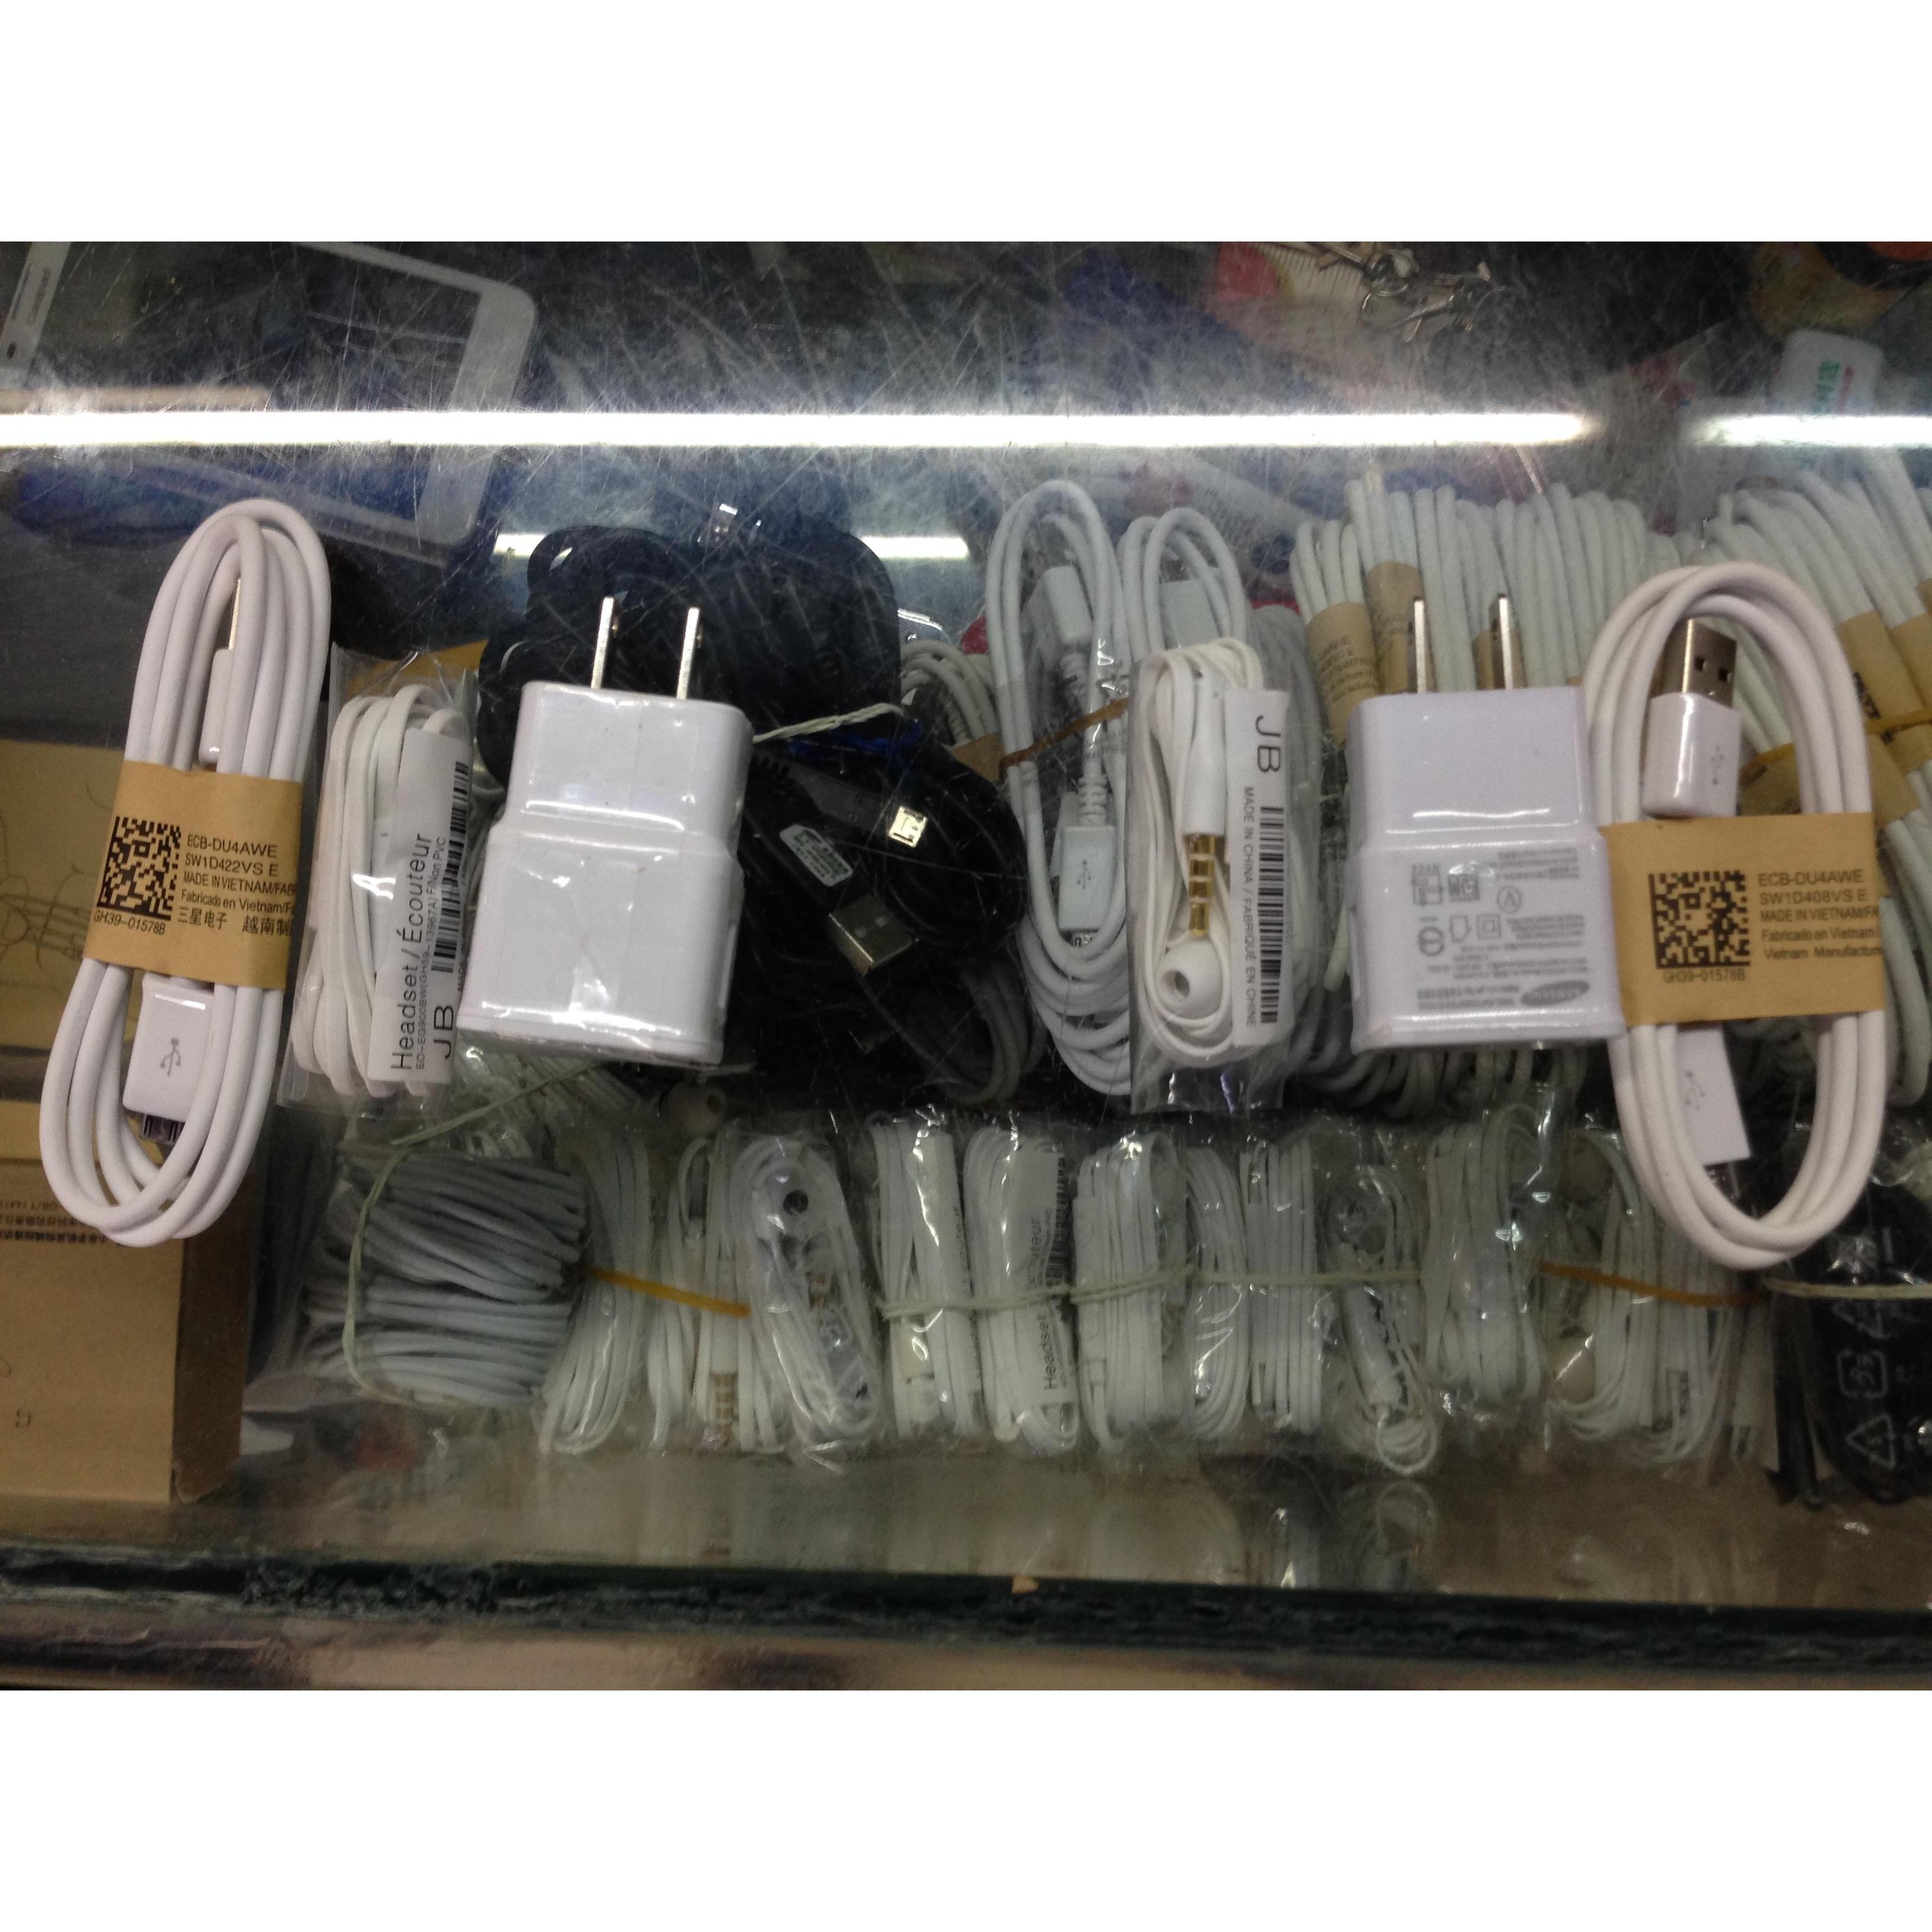 Samsung Samsung Charger Wholesale Suppliers